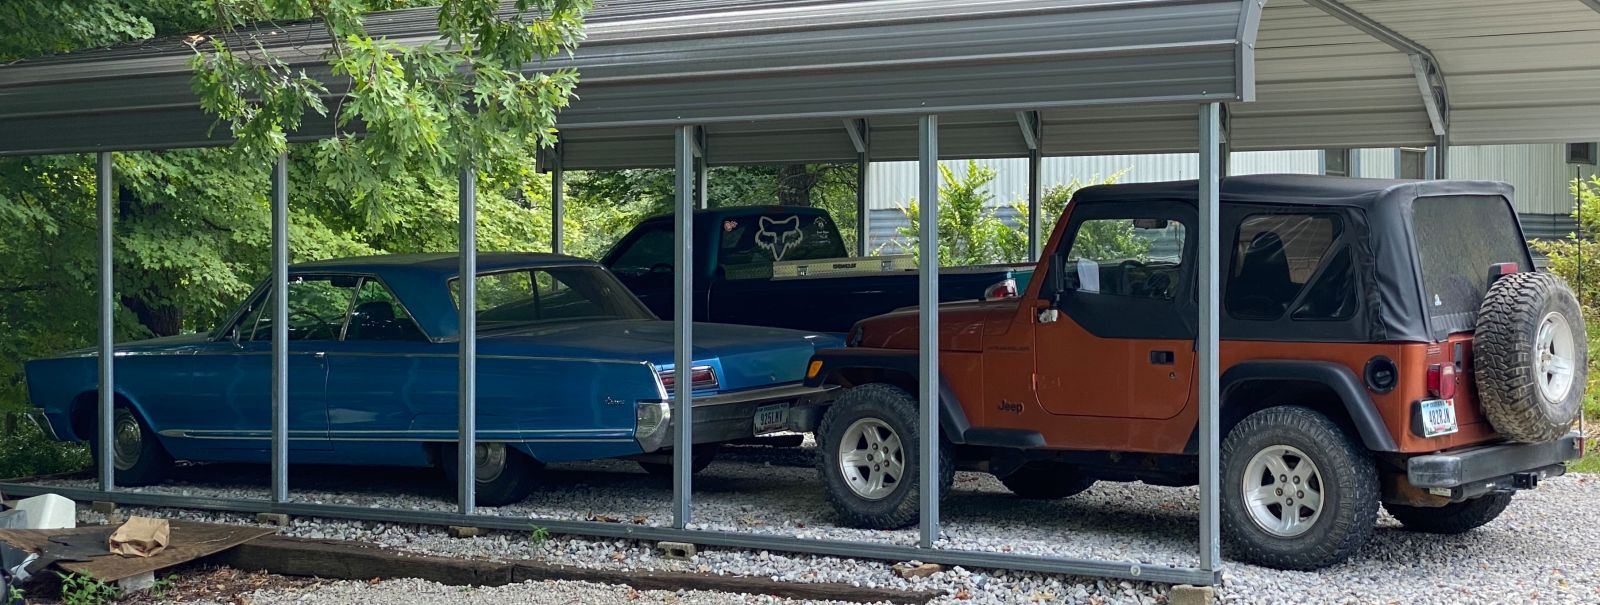 I figured someone would be interested in the blue car, so I could justify posting the orange TJ.